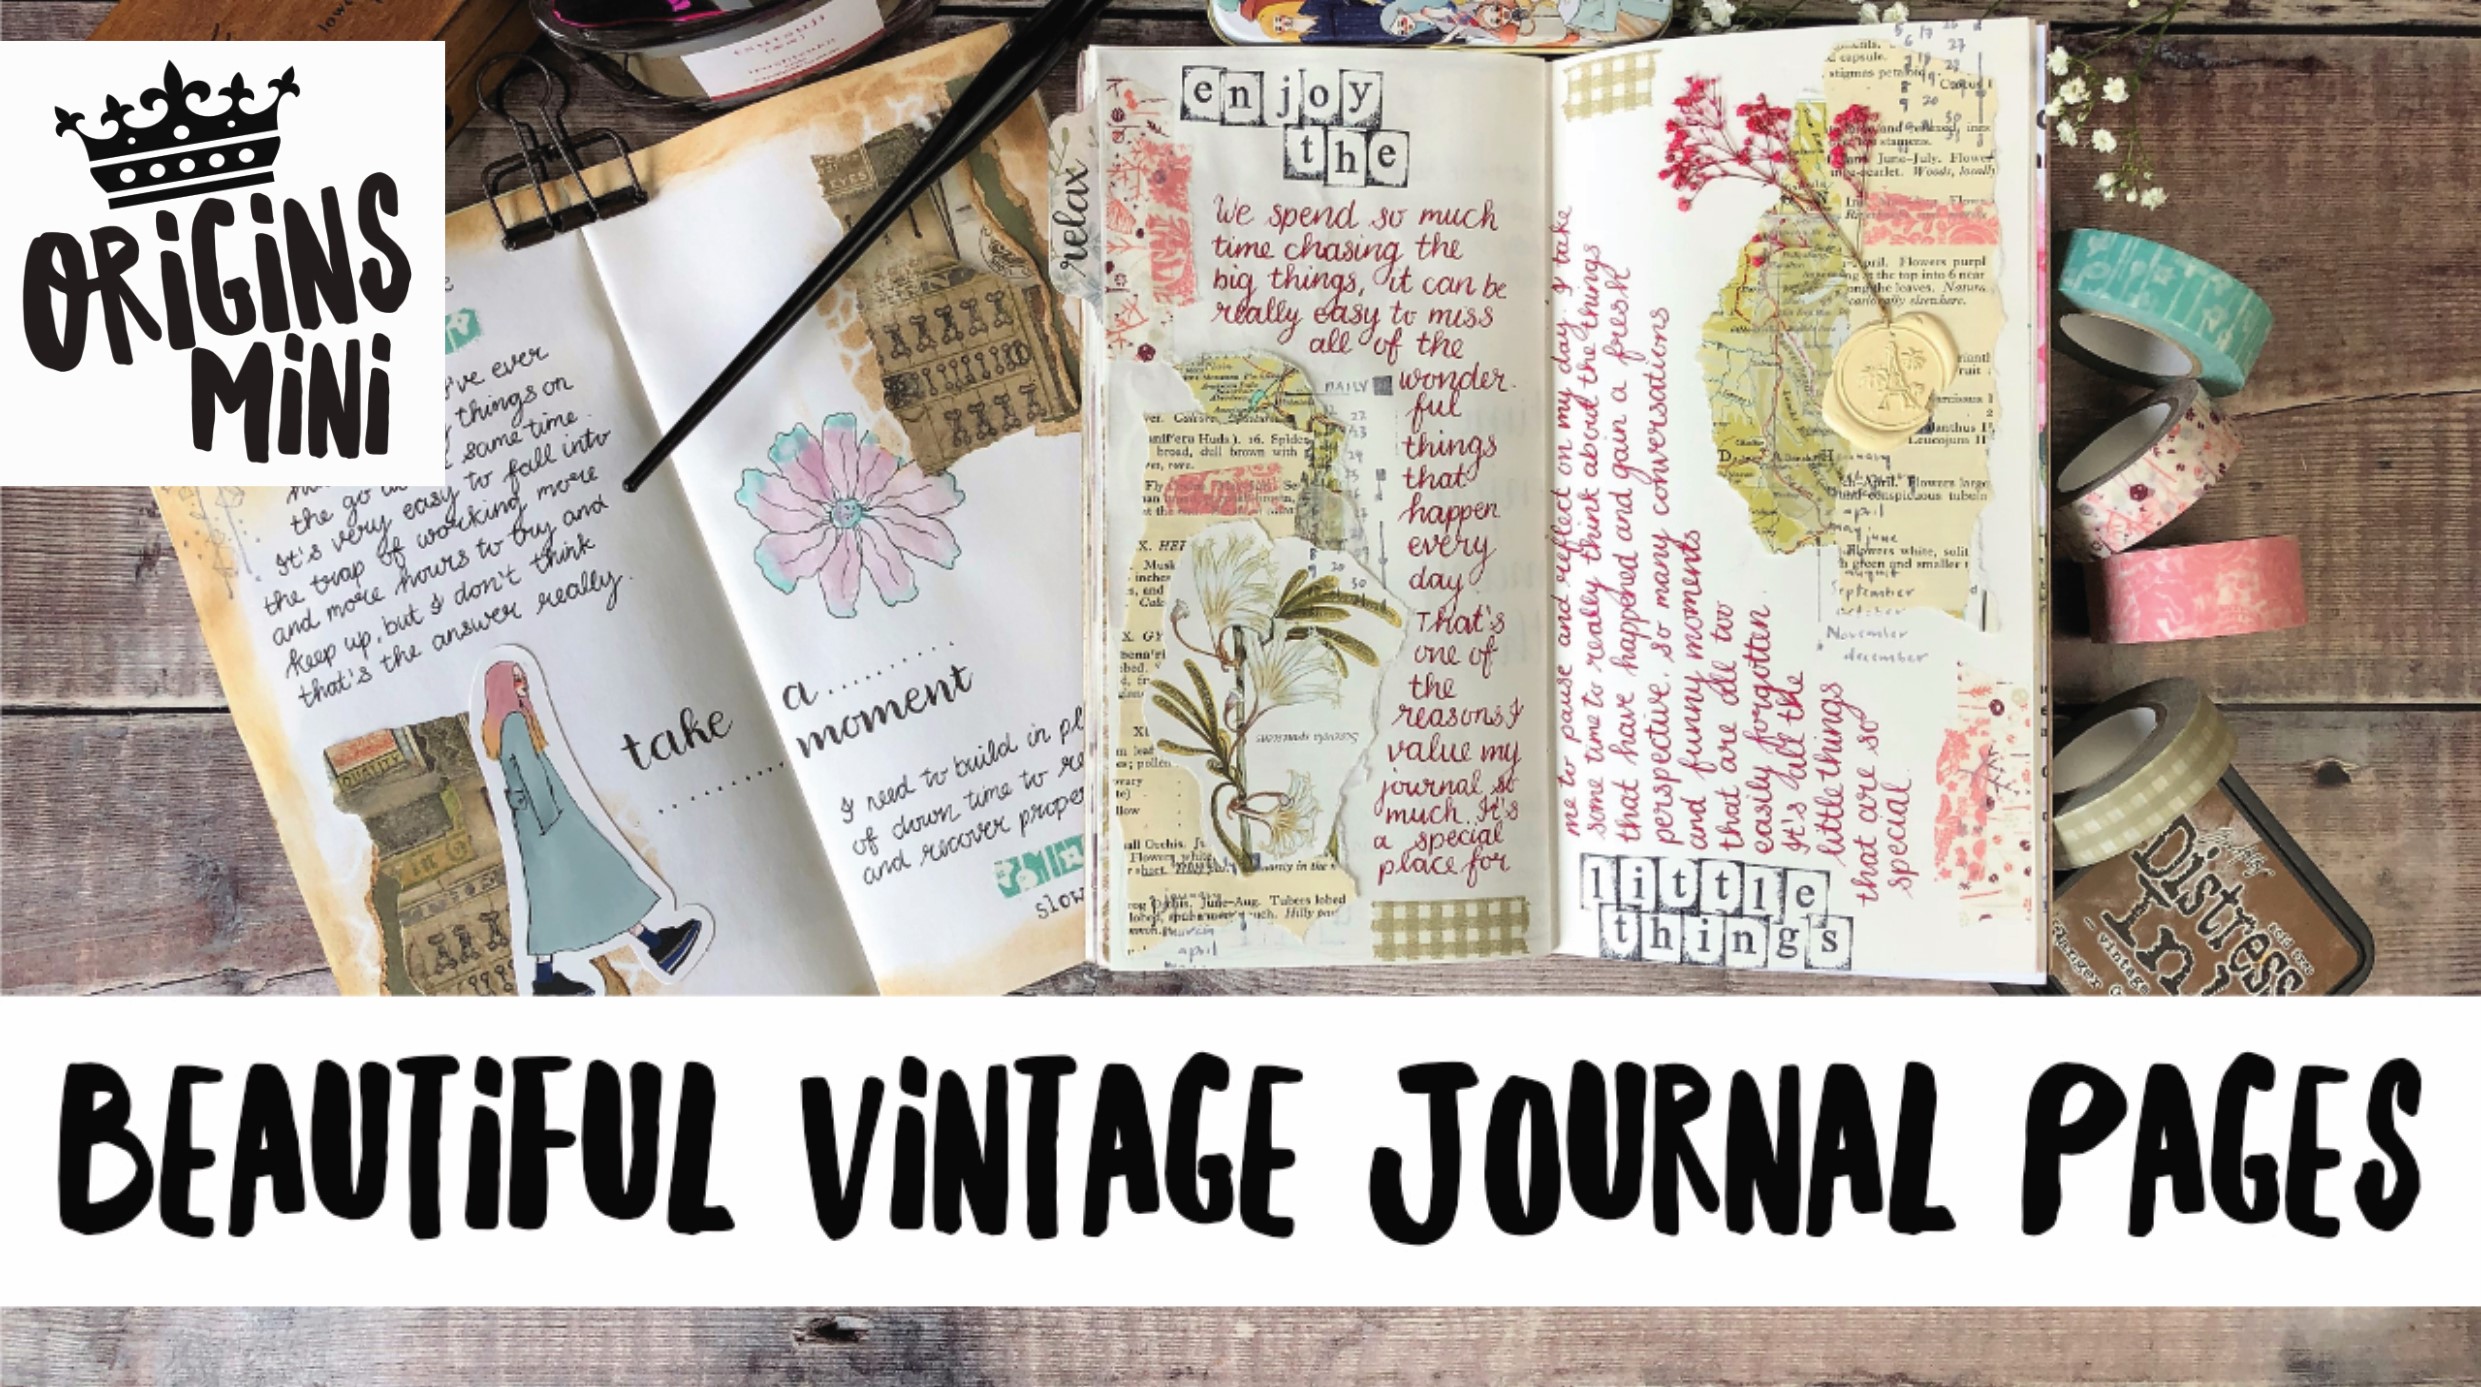 Beautiful vintage journal pages